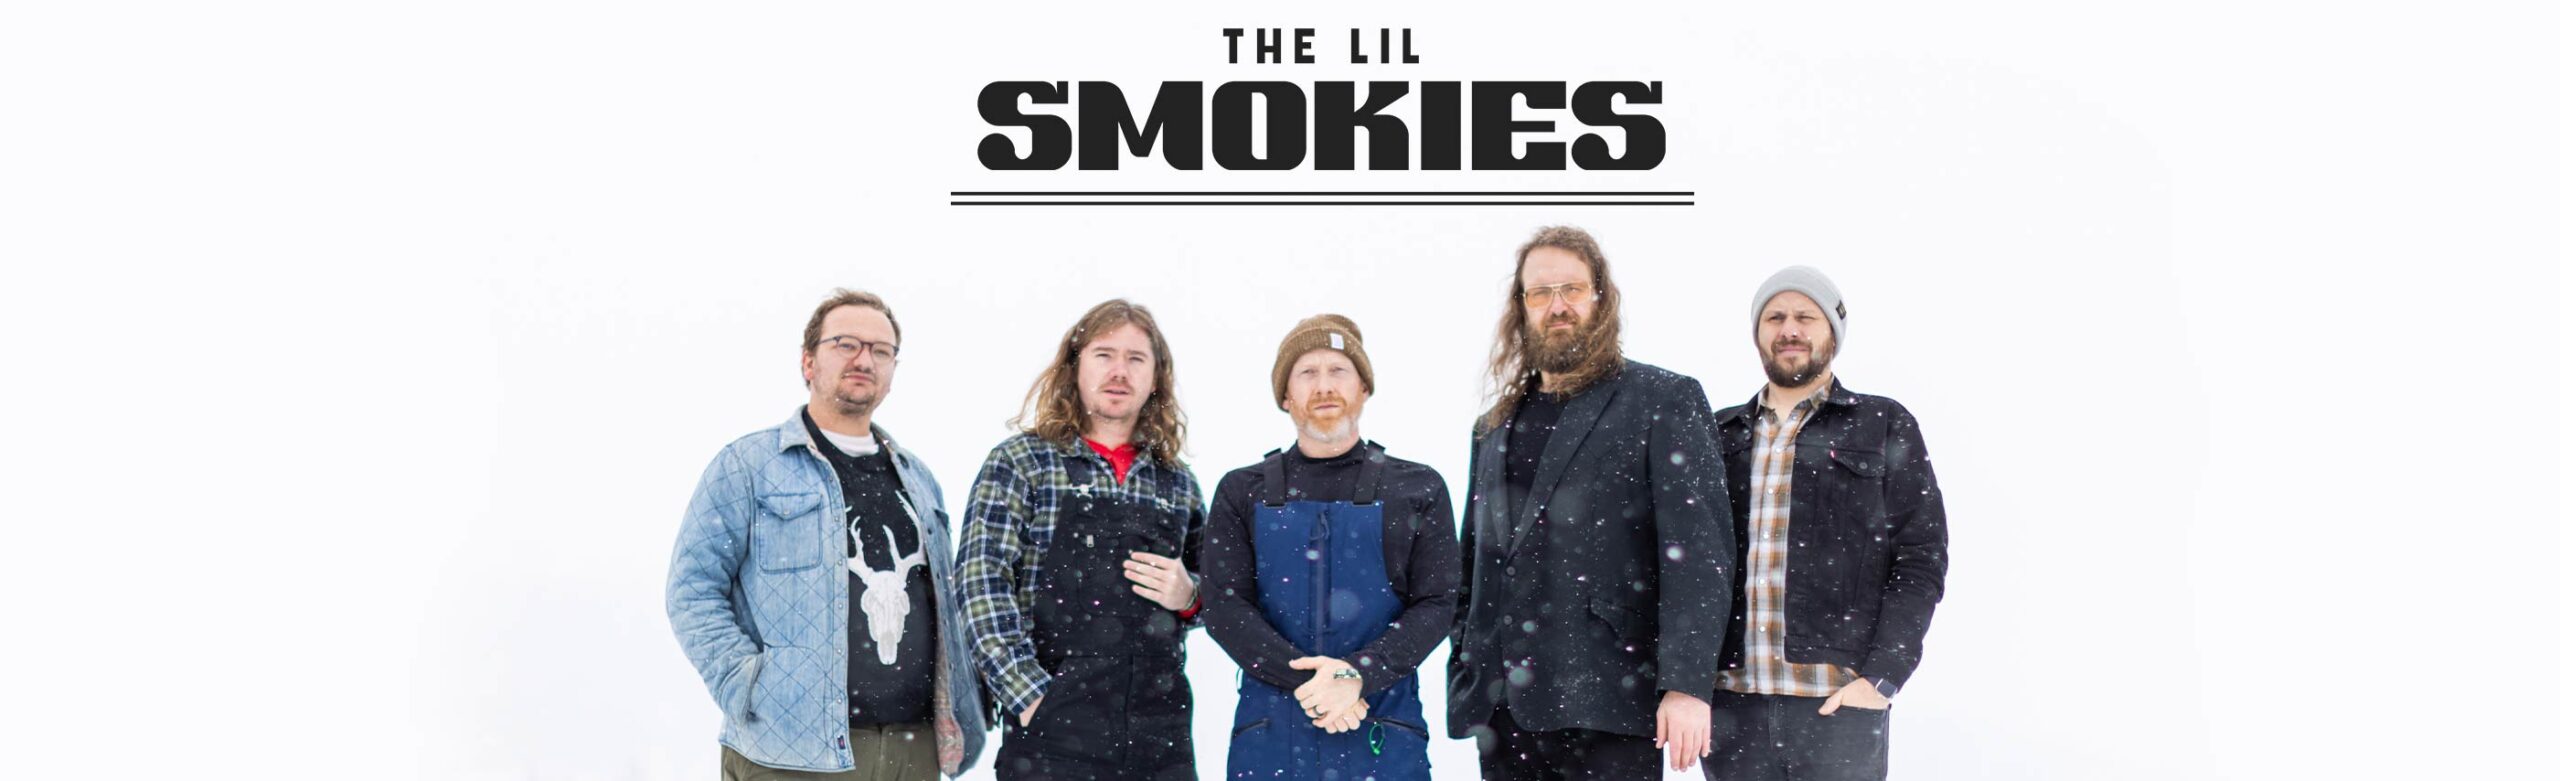 Win Tickets to The Lil Smokies in Montana Image